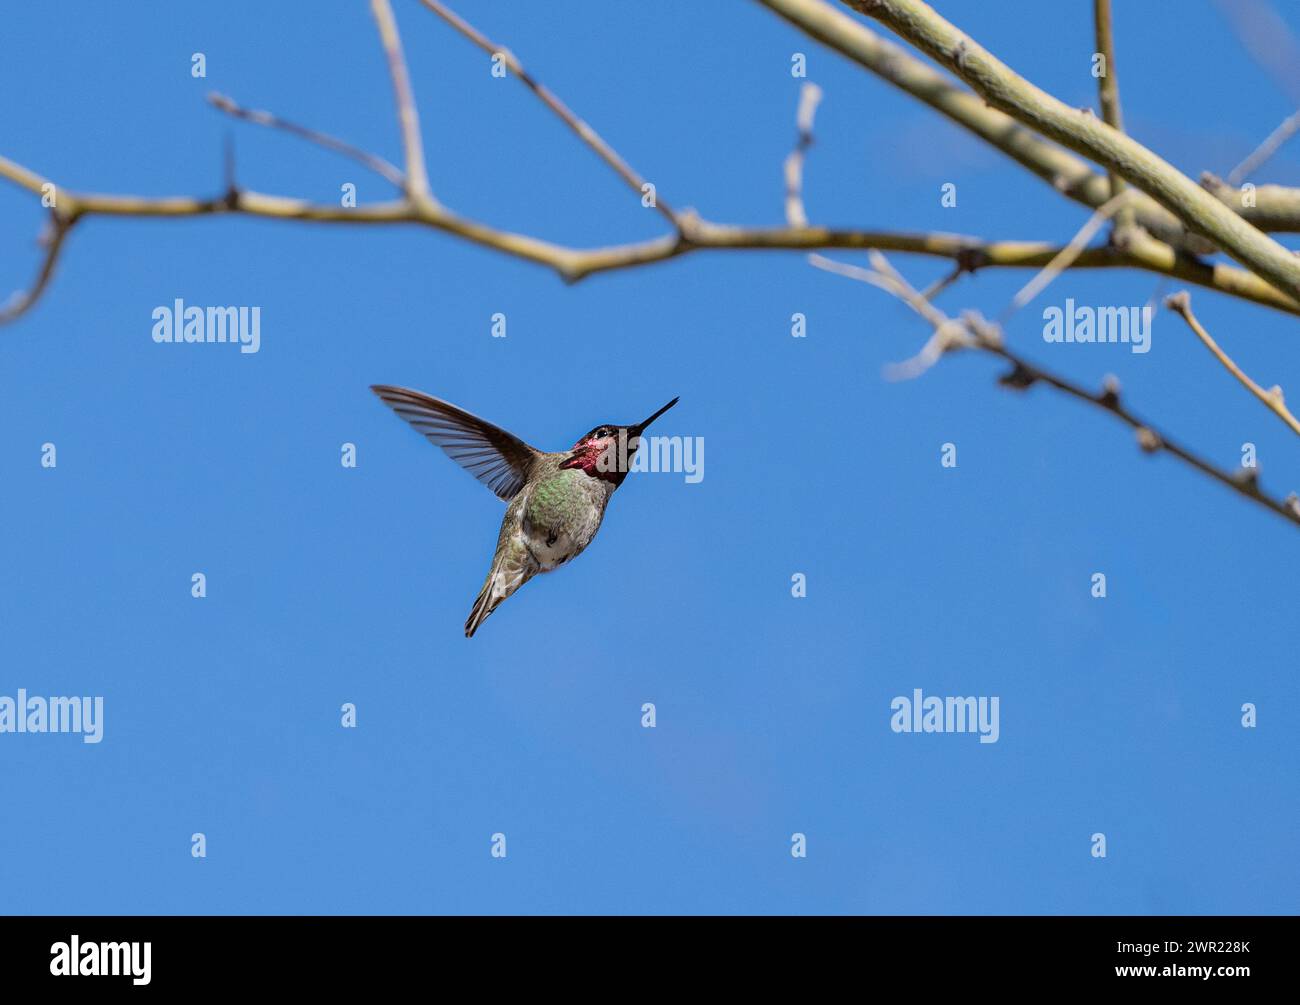 Male hummingbird flying up towards some branches Stock Photo